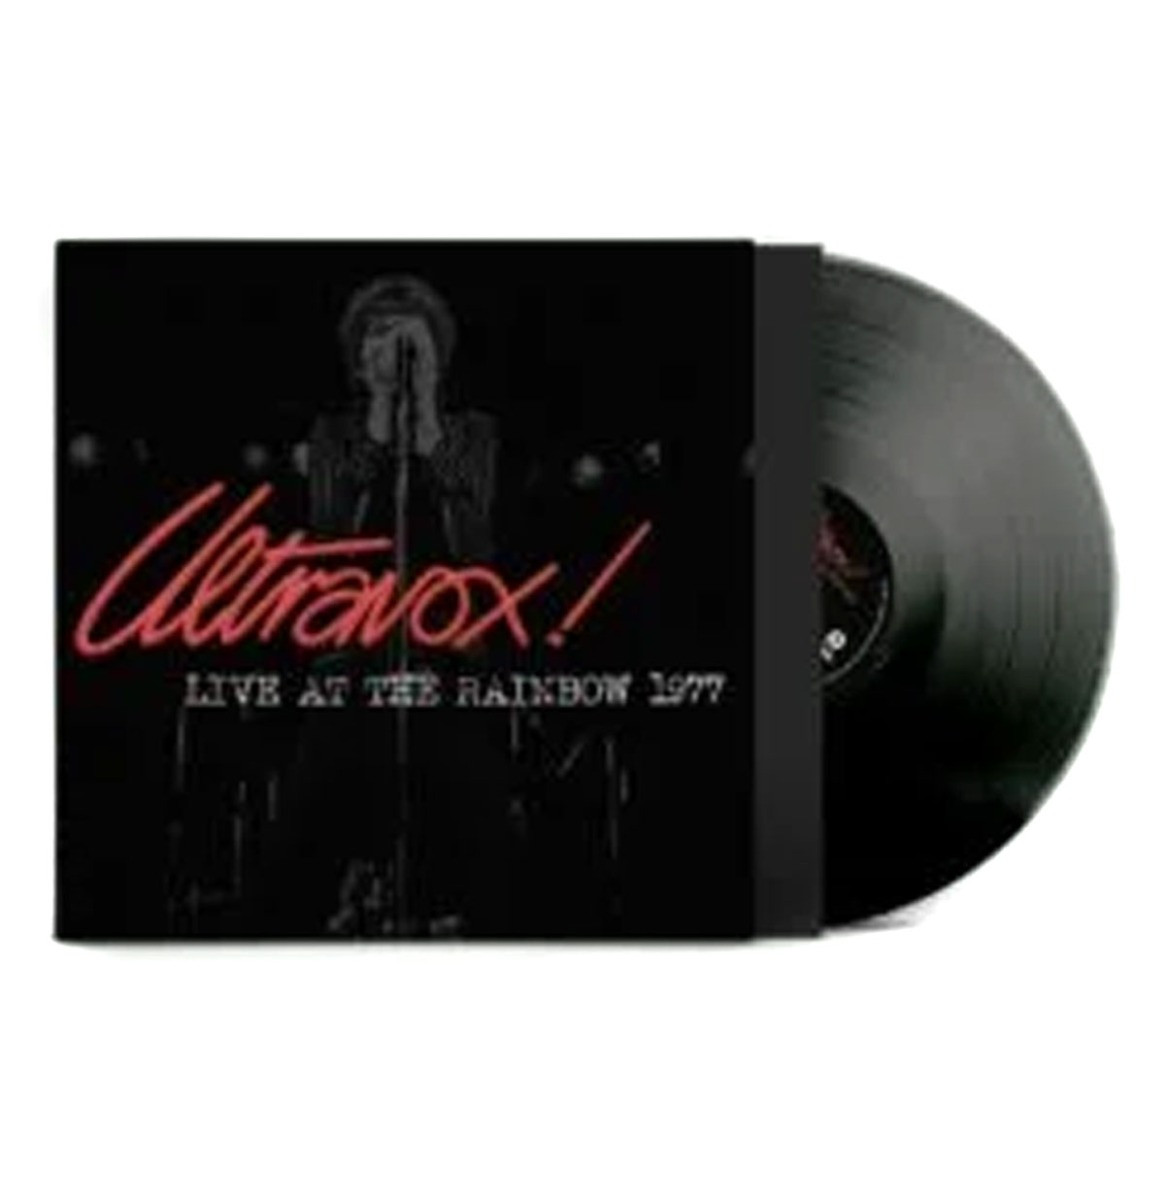 Ultravox! - Live At The Rainbow Theatre, London - February 1977 LP (Record Store Day 2022)